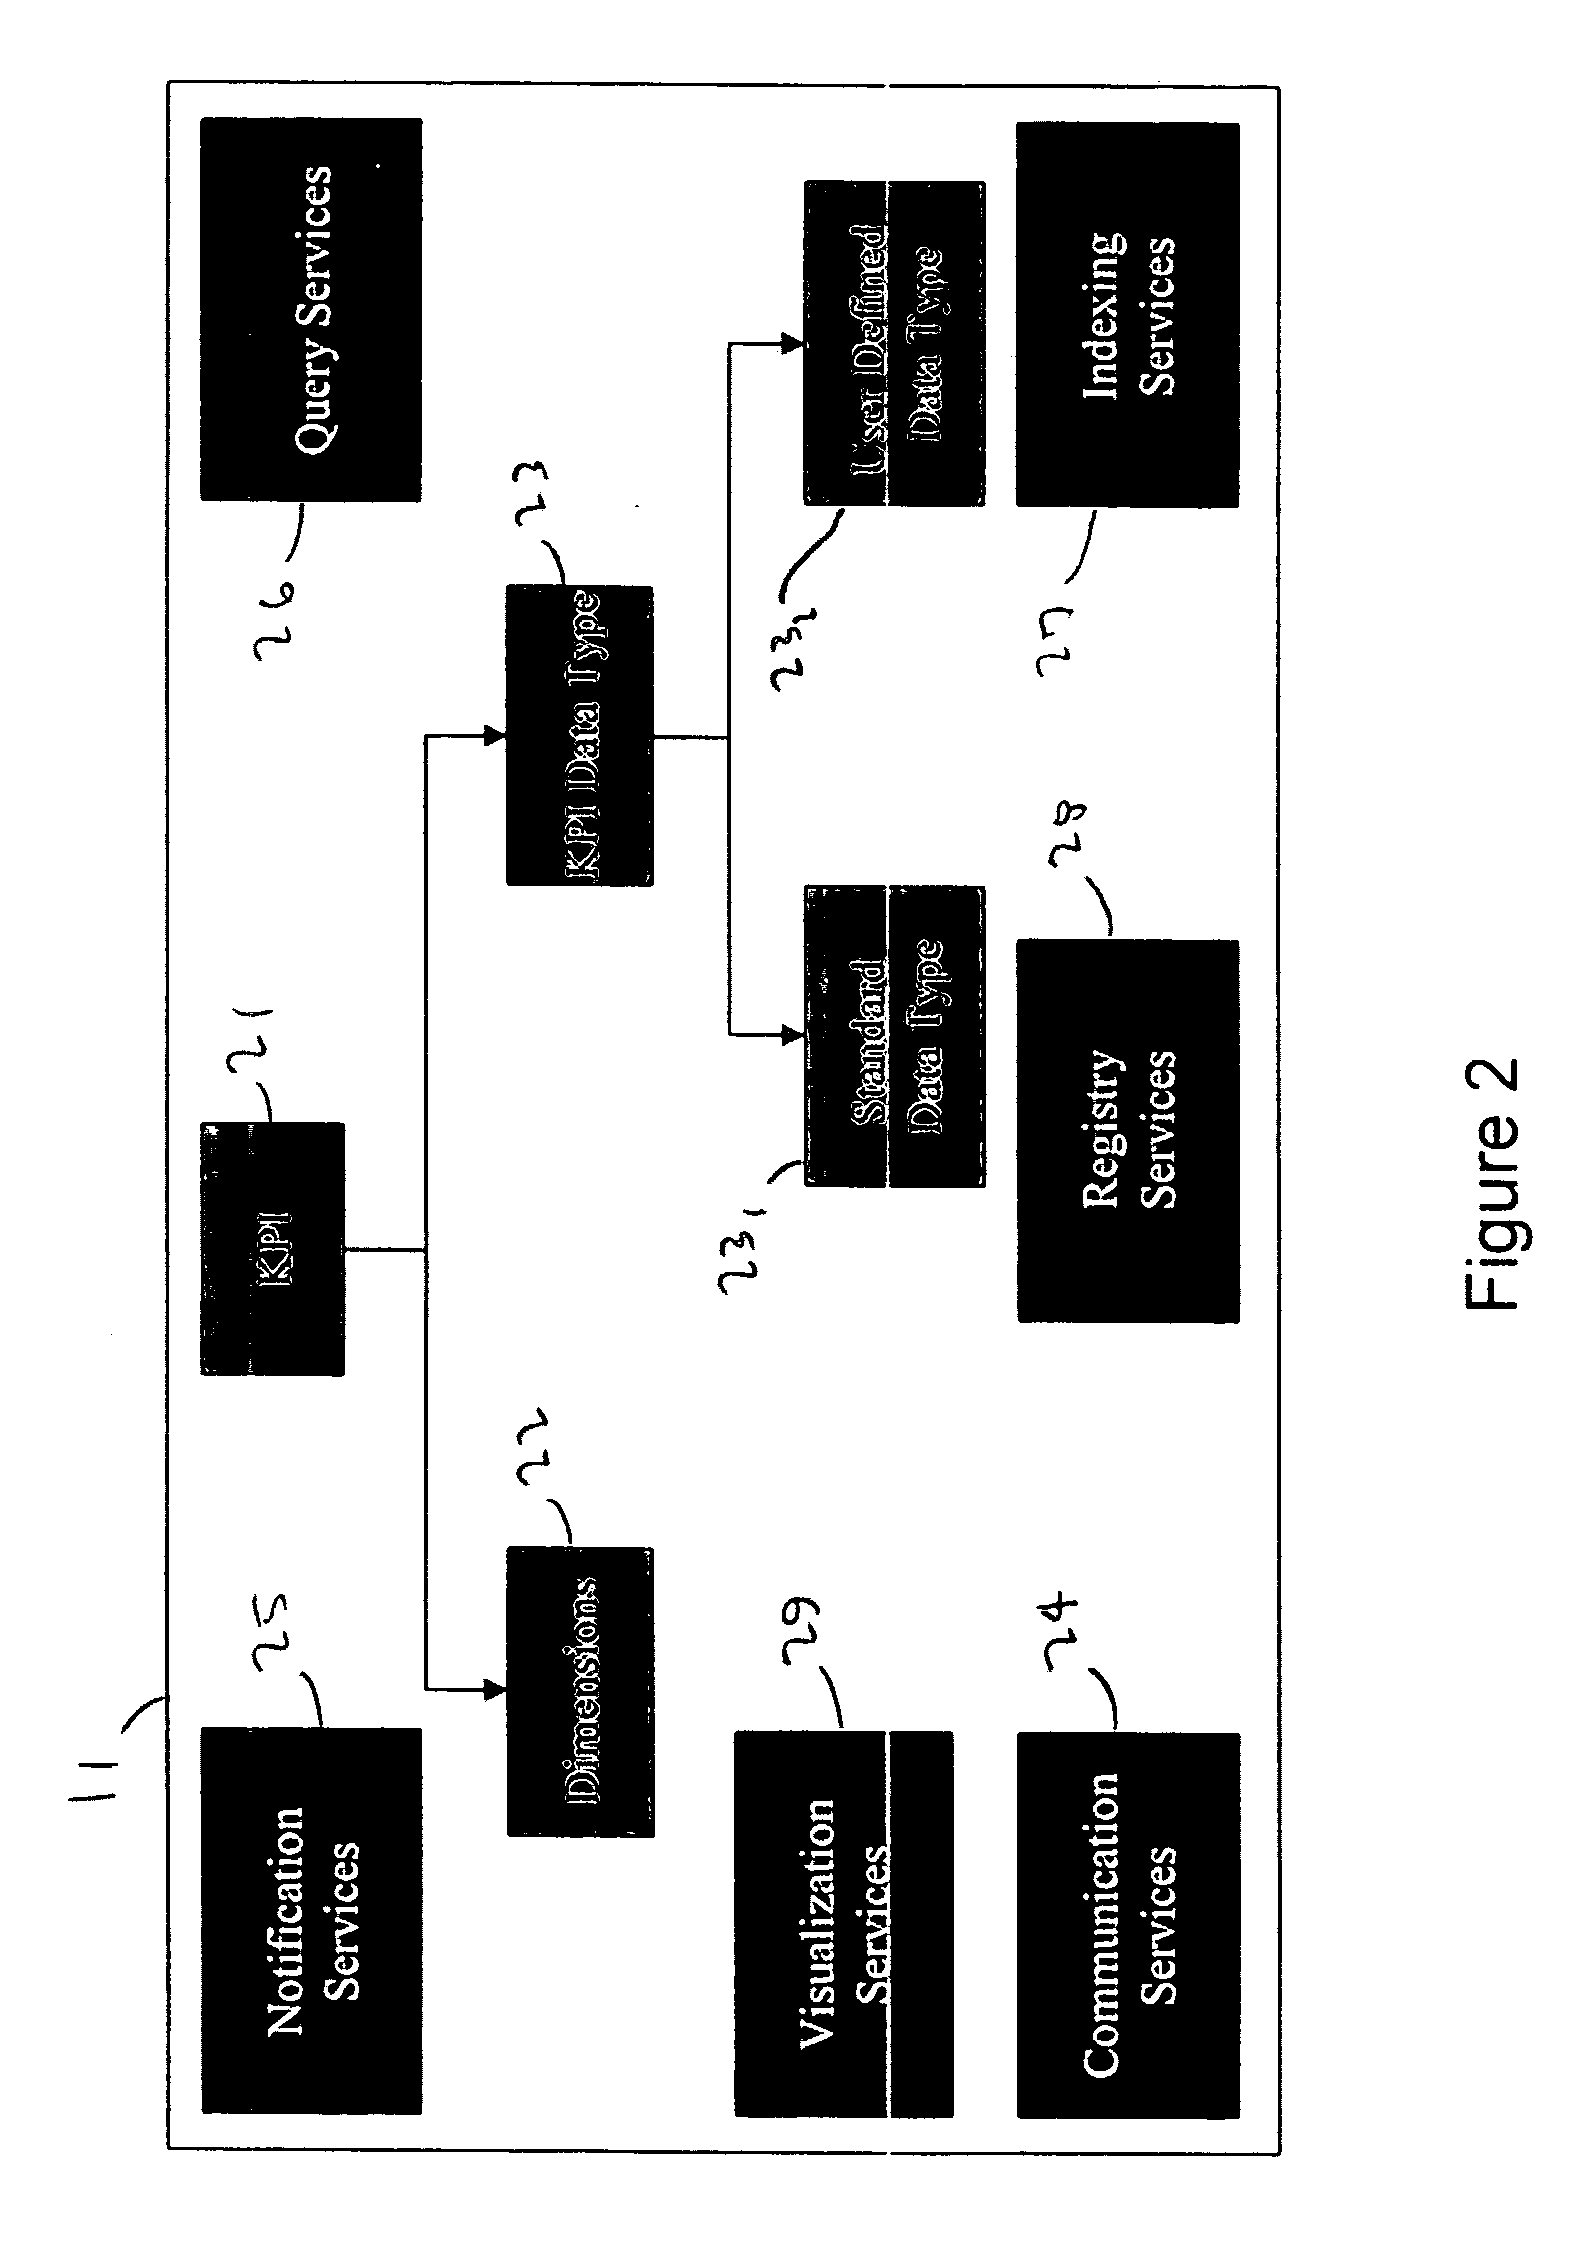 Apparatus and method of hosting on-demand business context information